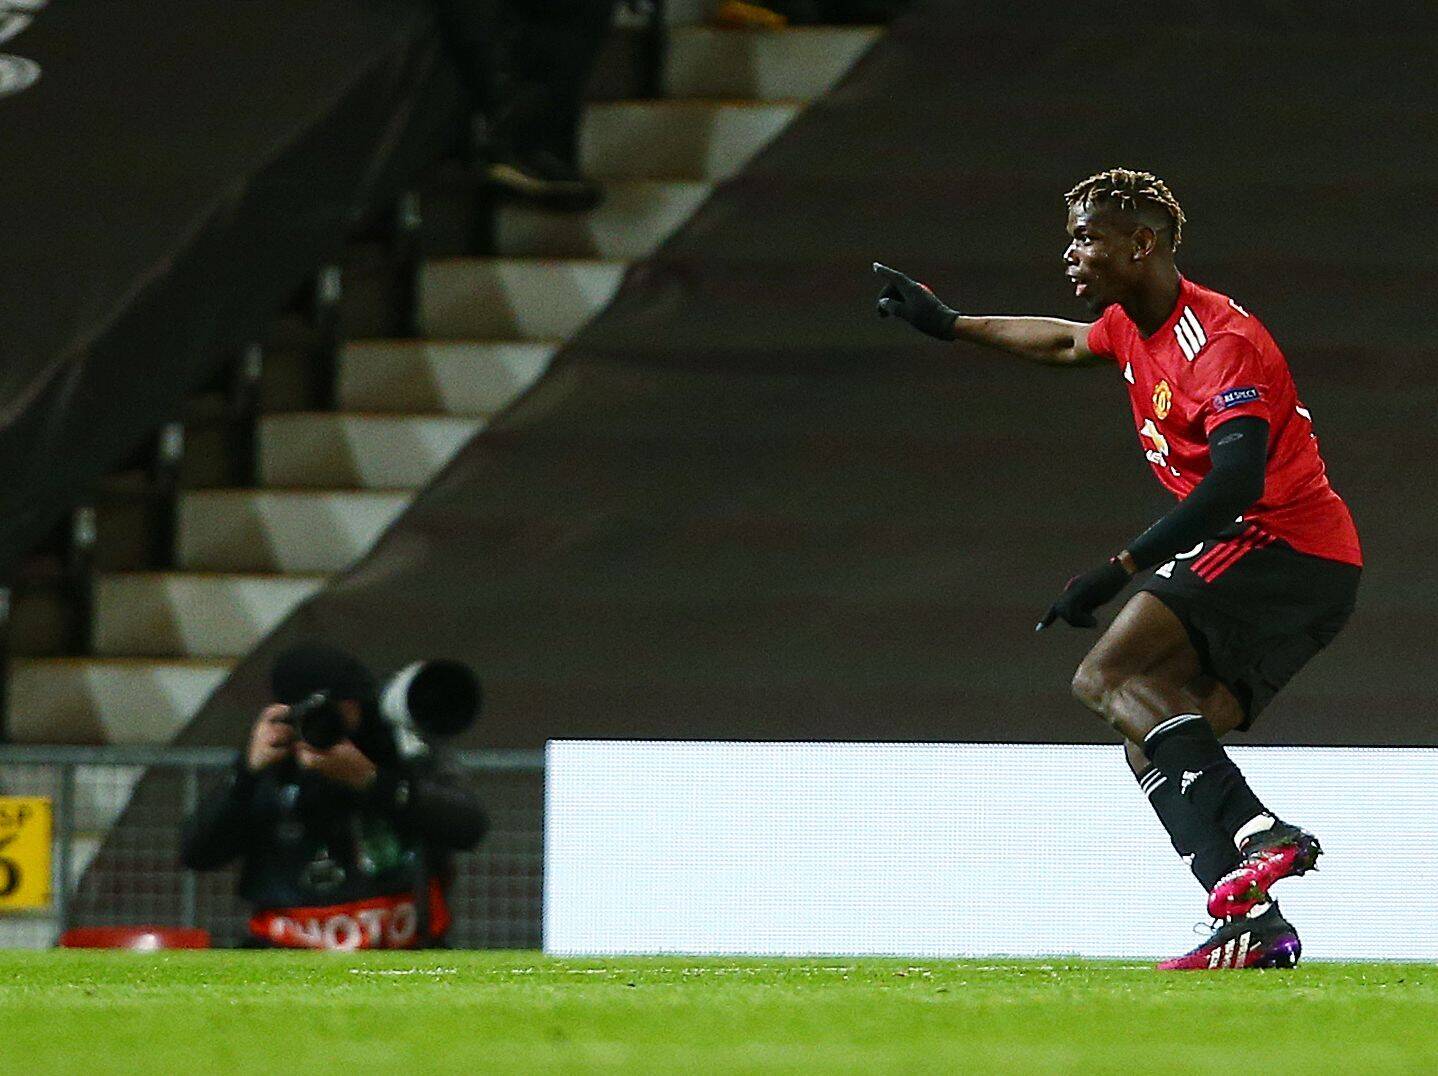 Paul Pogba in action for Manchester United. (Photo by Matt West/BPI/Shutterstock)